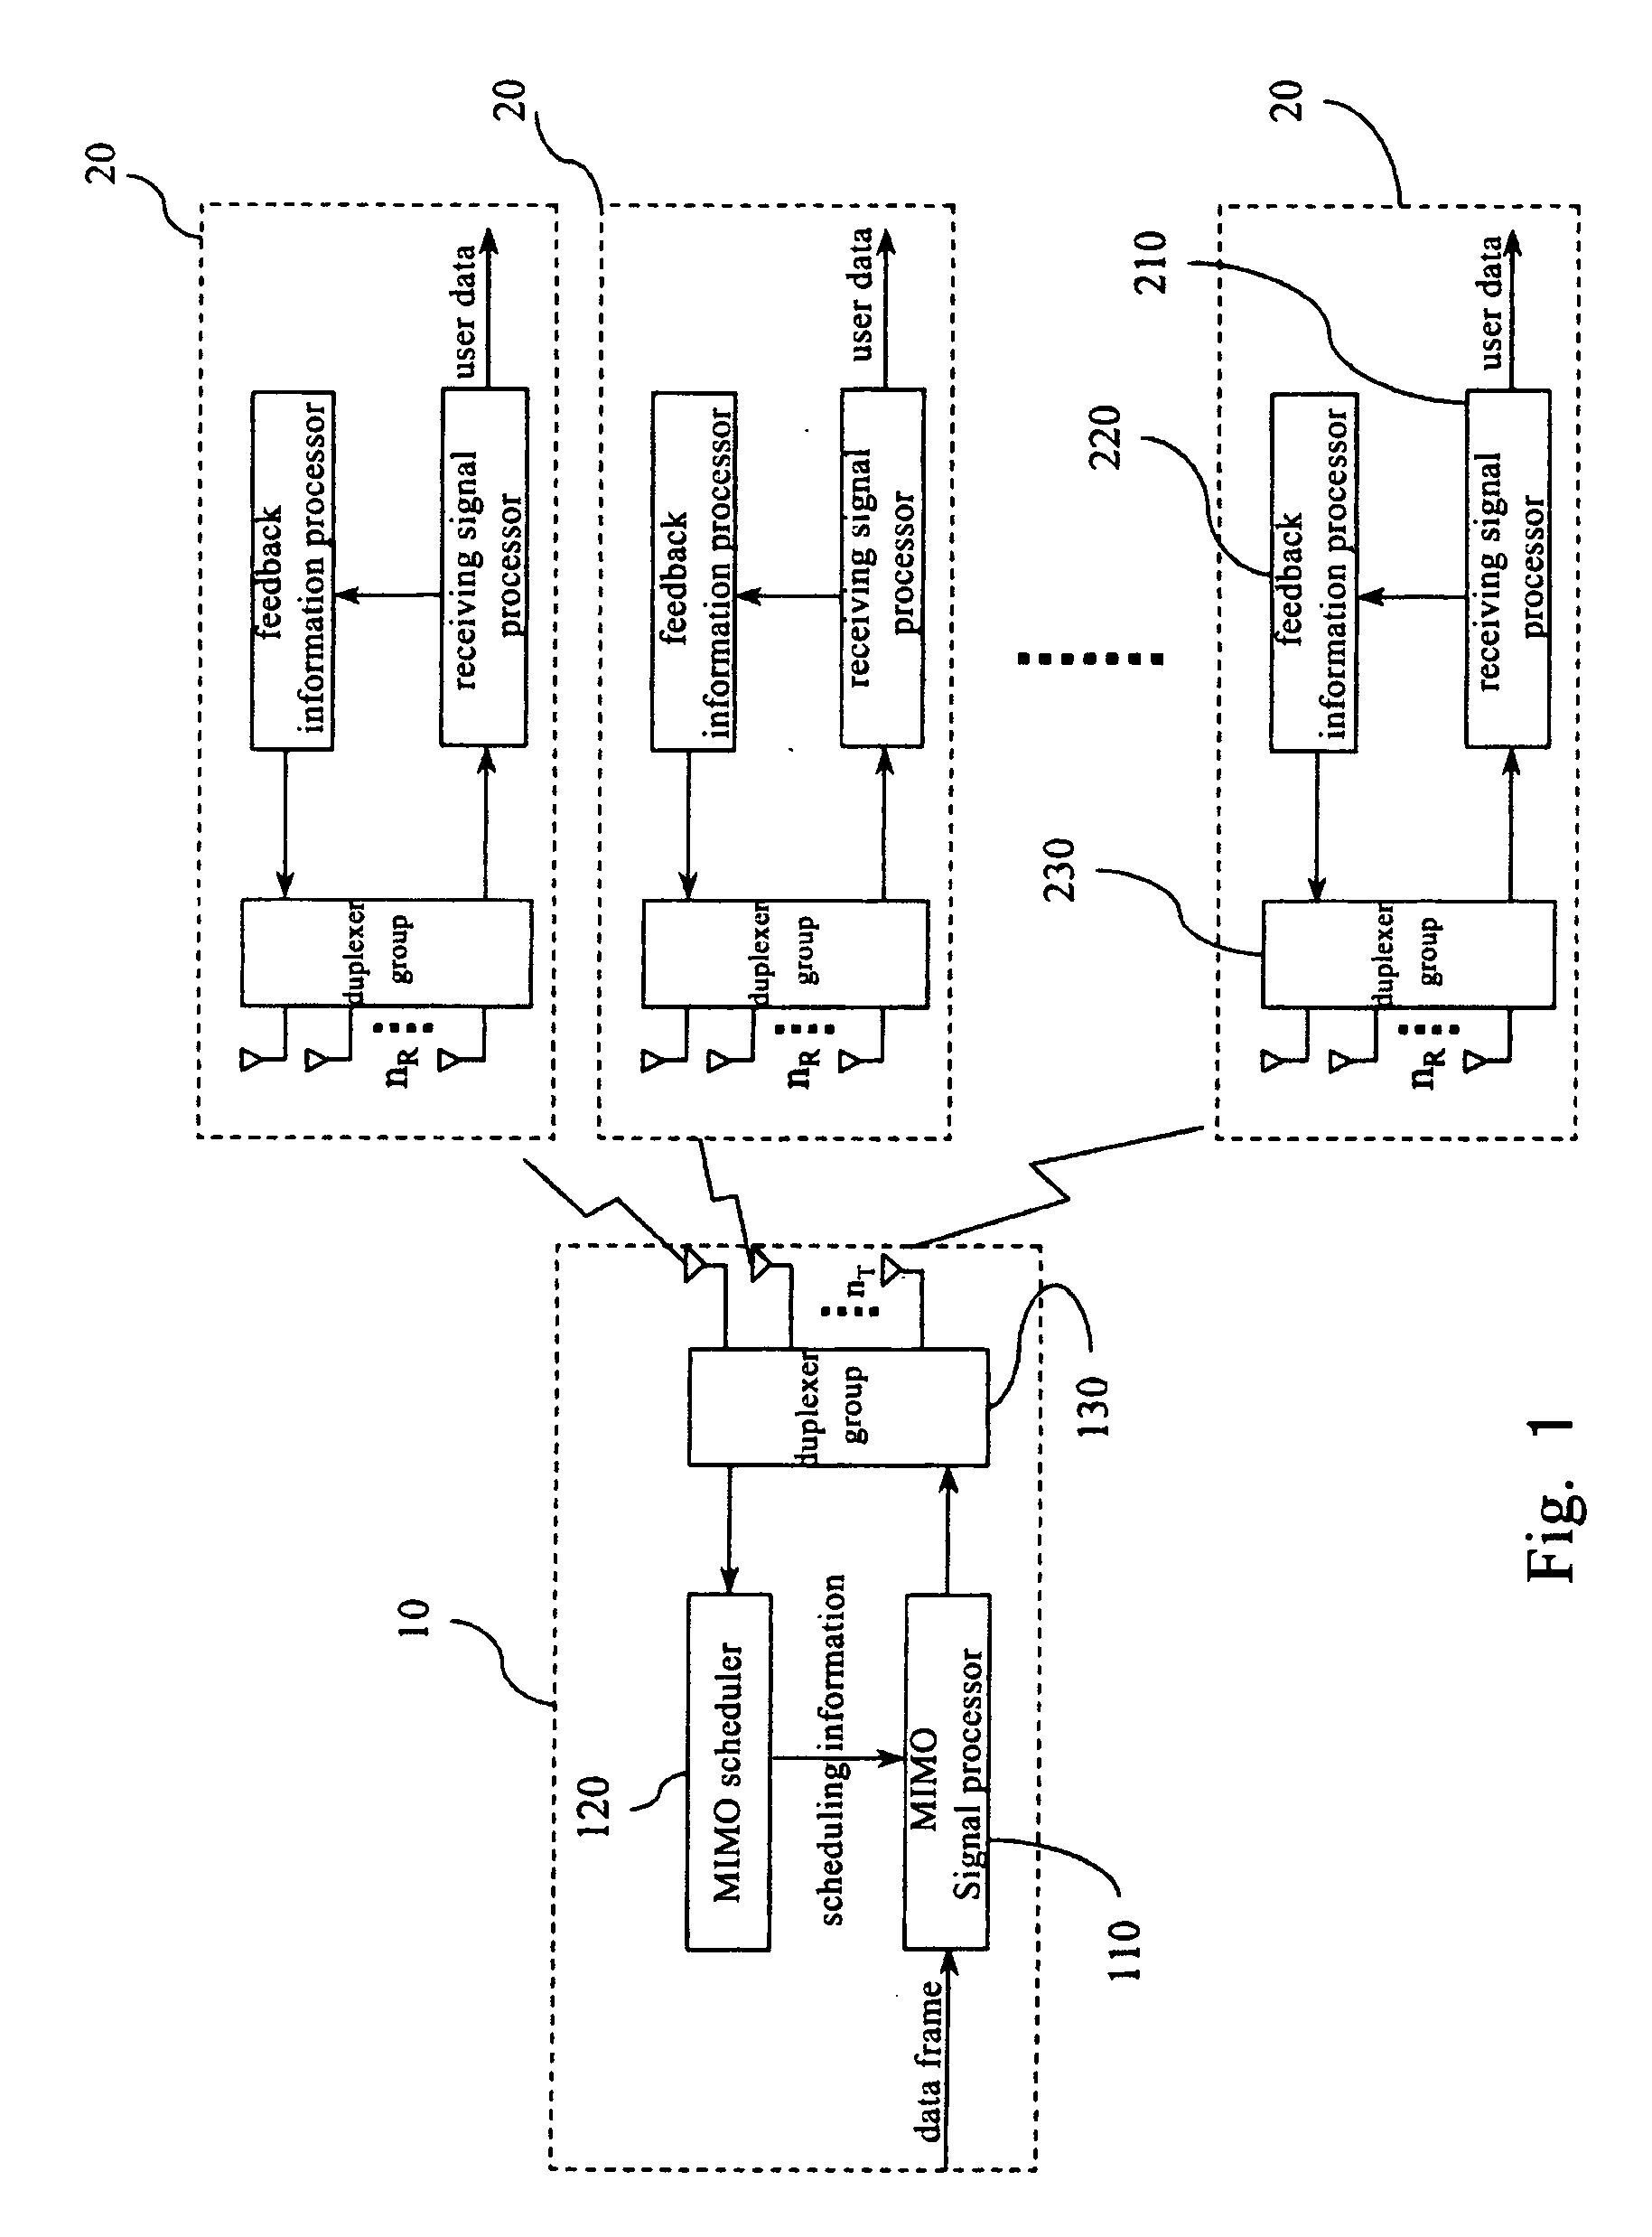 MIMO communication system and method capable of adaptive user scheduling